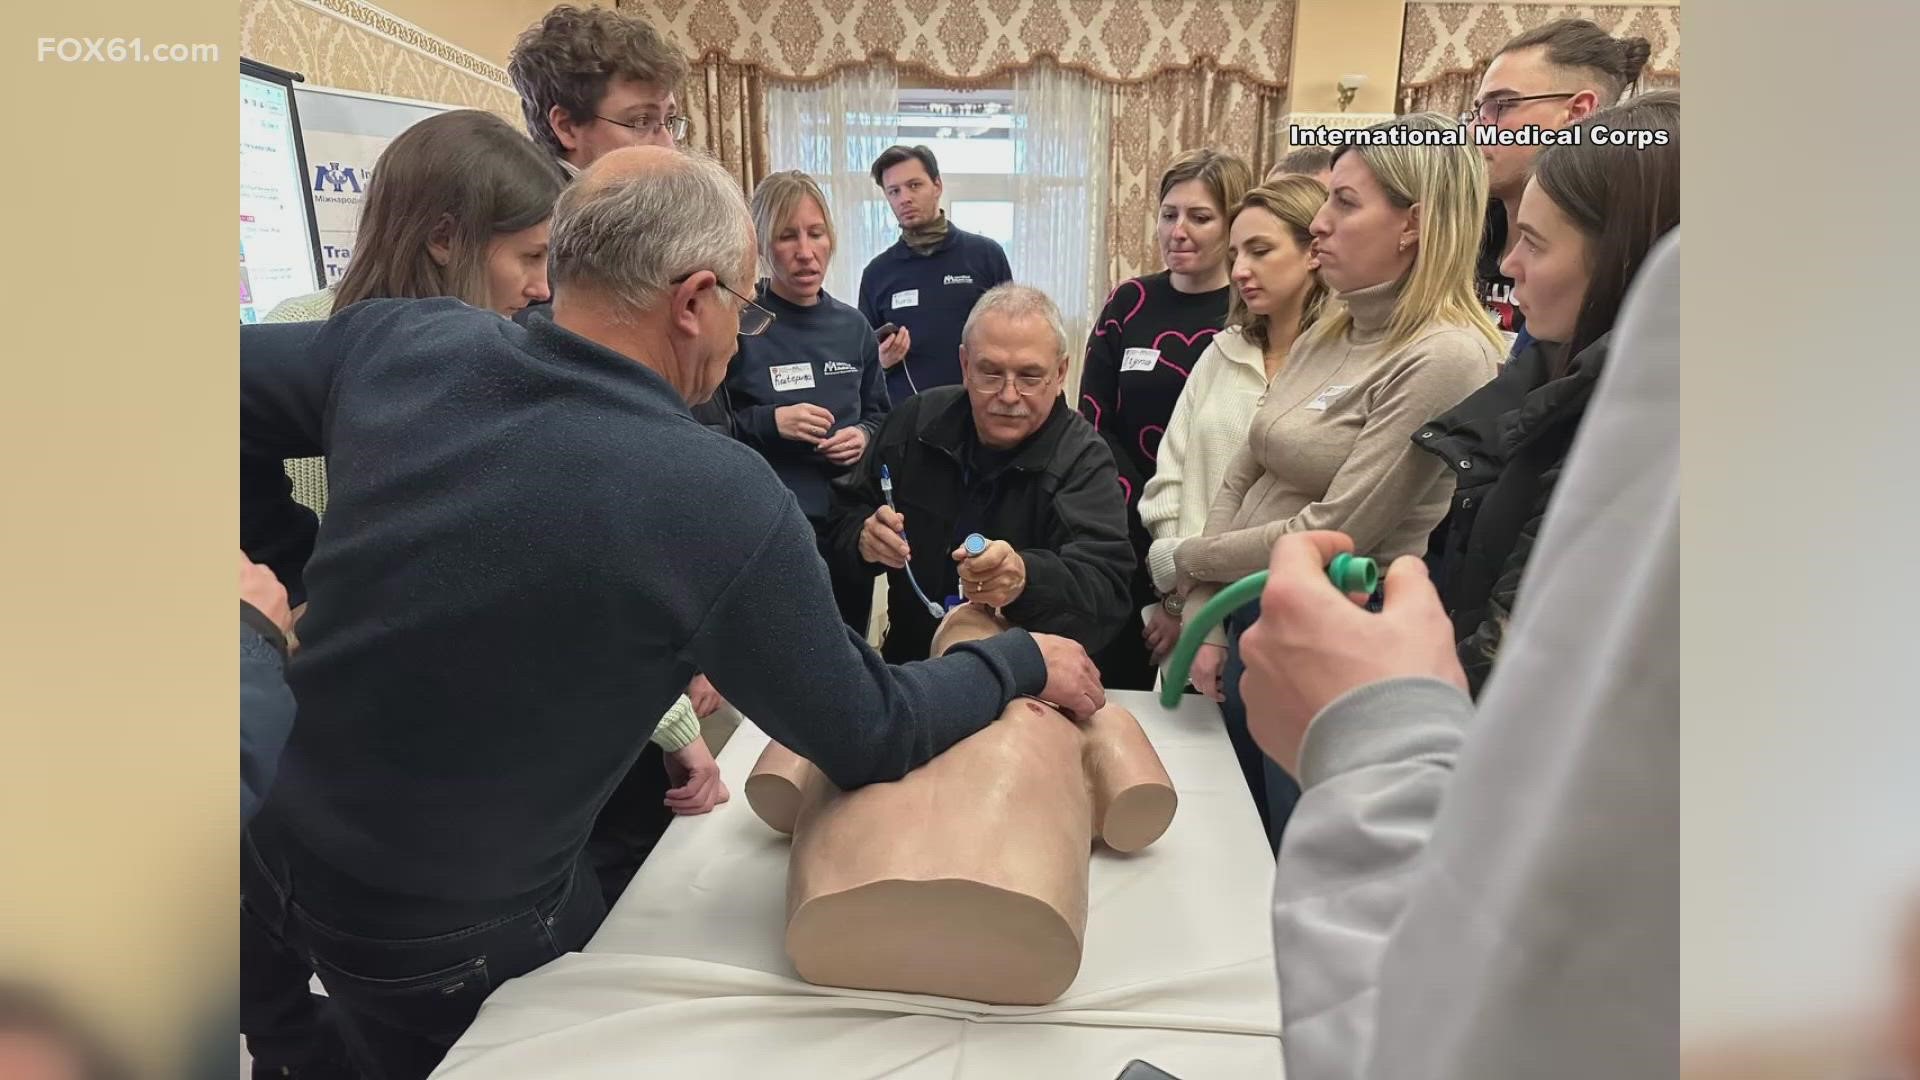 Greg Klaus is back in Ukraine today on his third trip there, providing medical-care classes to nurses and healthcare workers helping with the war effort.